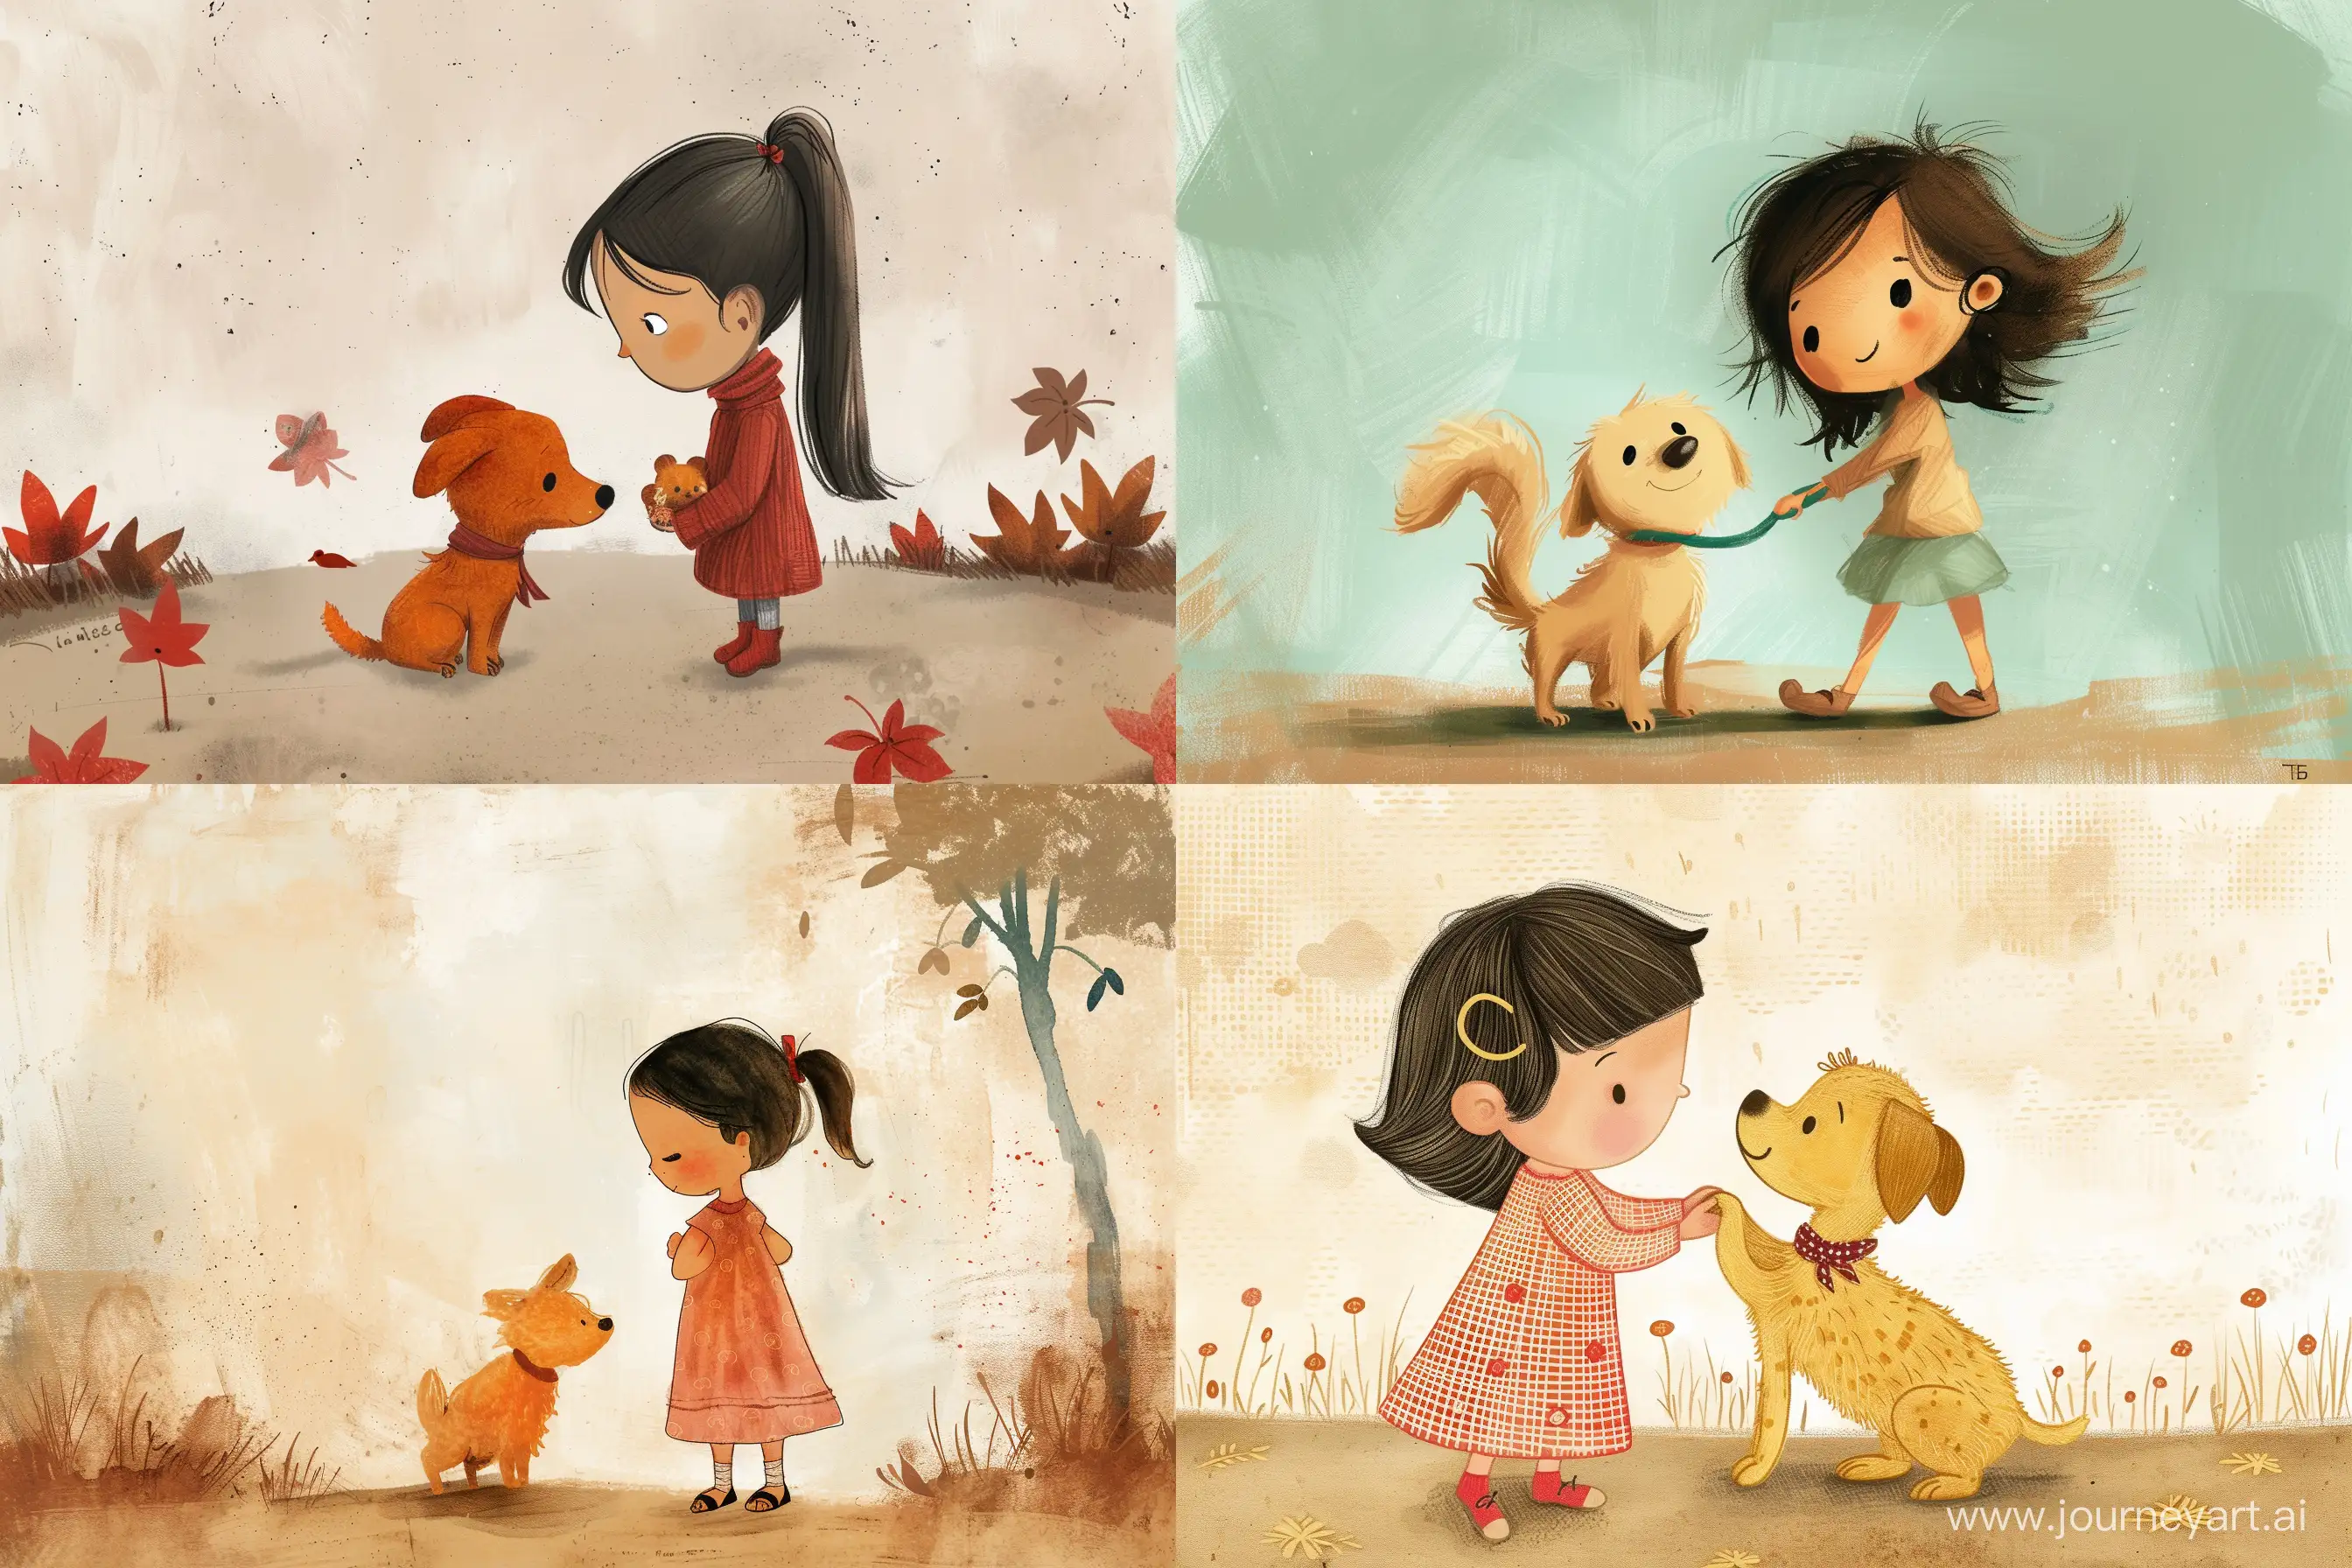 Charming-Illustration-of-a-Playful-Girl-with-Her-Loyal-Dog